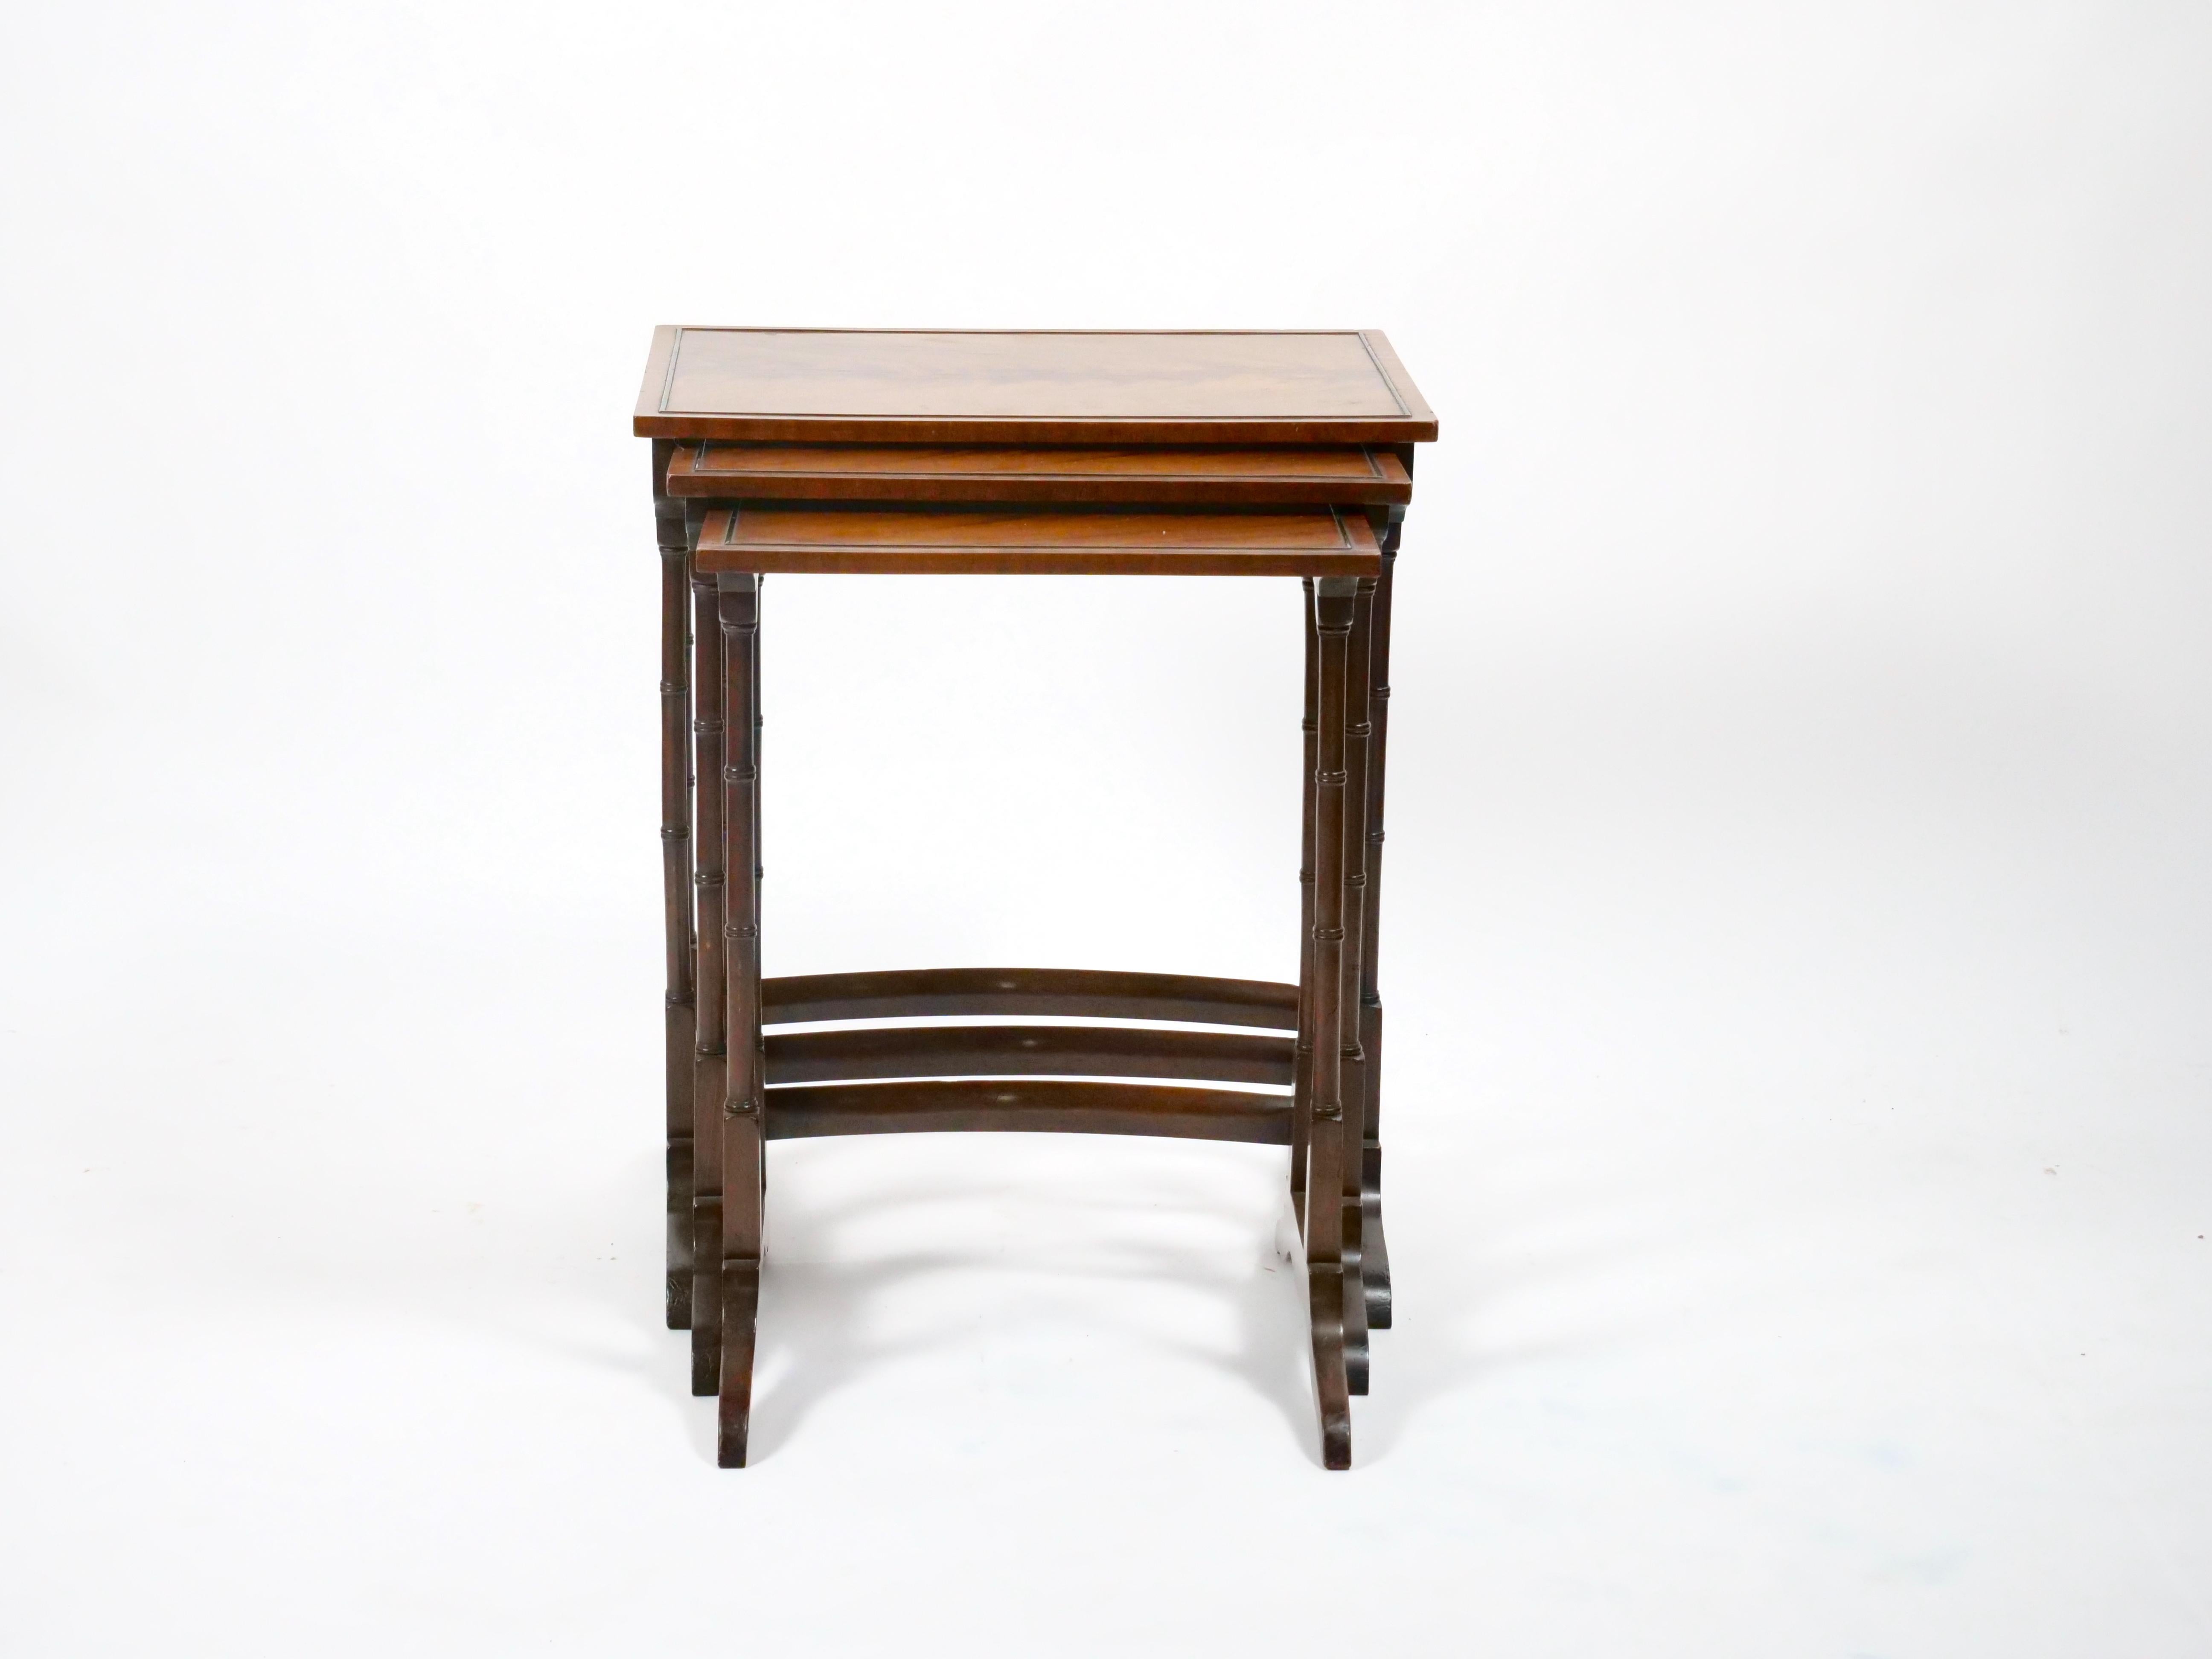 19th century Mahogany Inlaid Top Decorated Stacking Tables For Sale 5